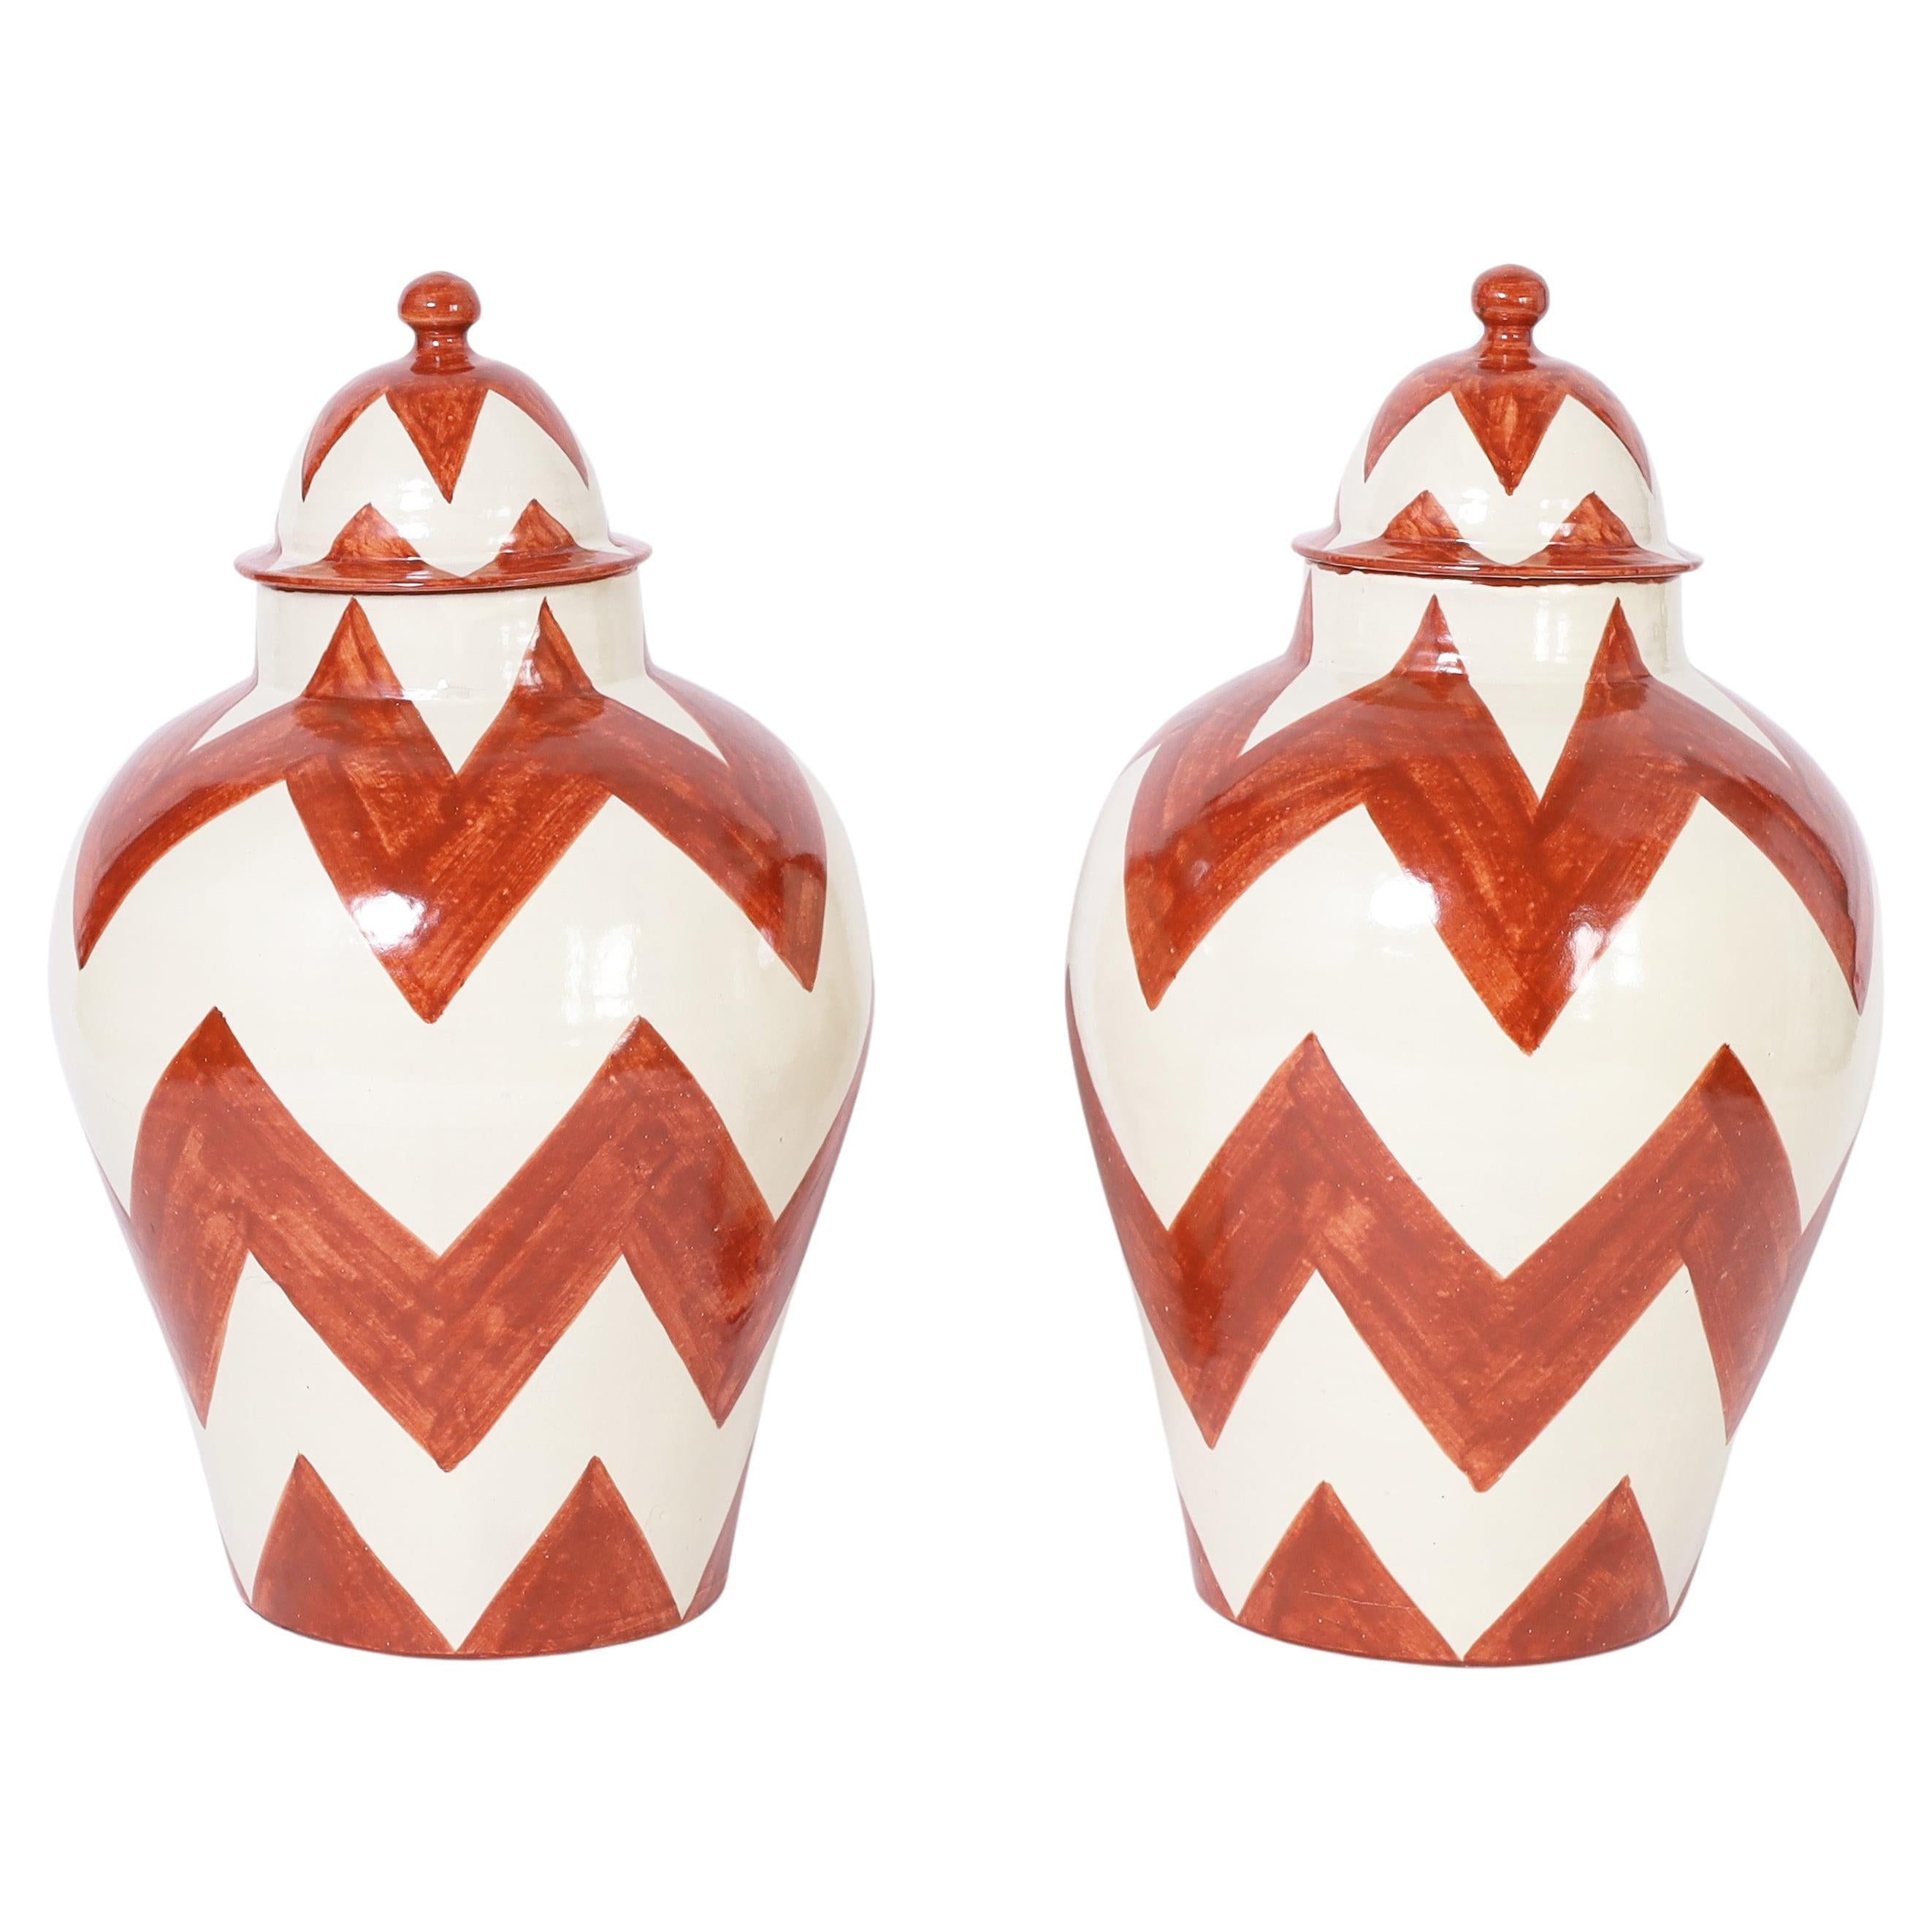 Pair of Large Vintage Terra Cotta Lidded Urns with Chevron Designs